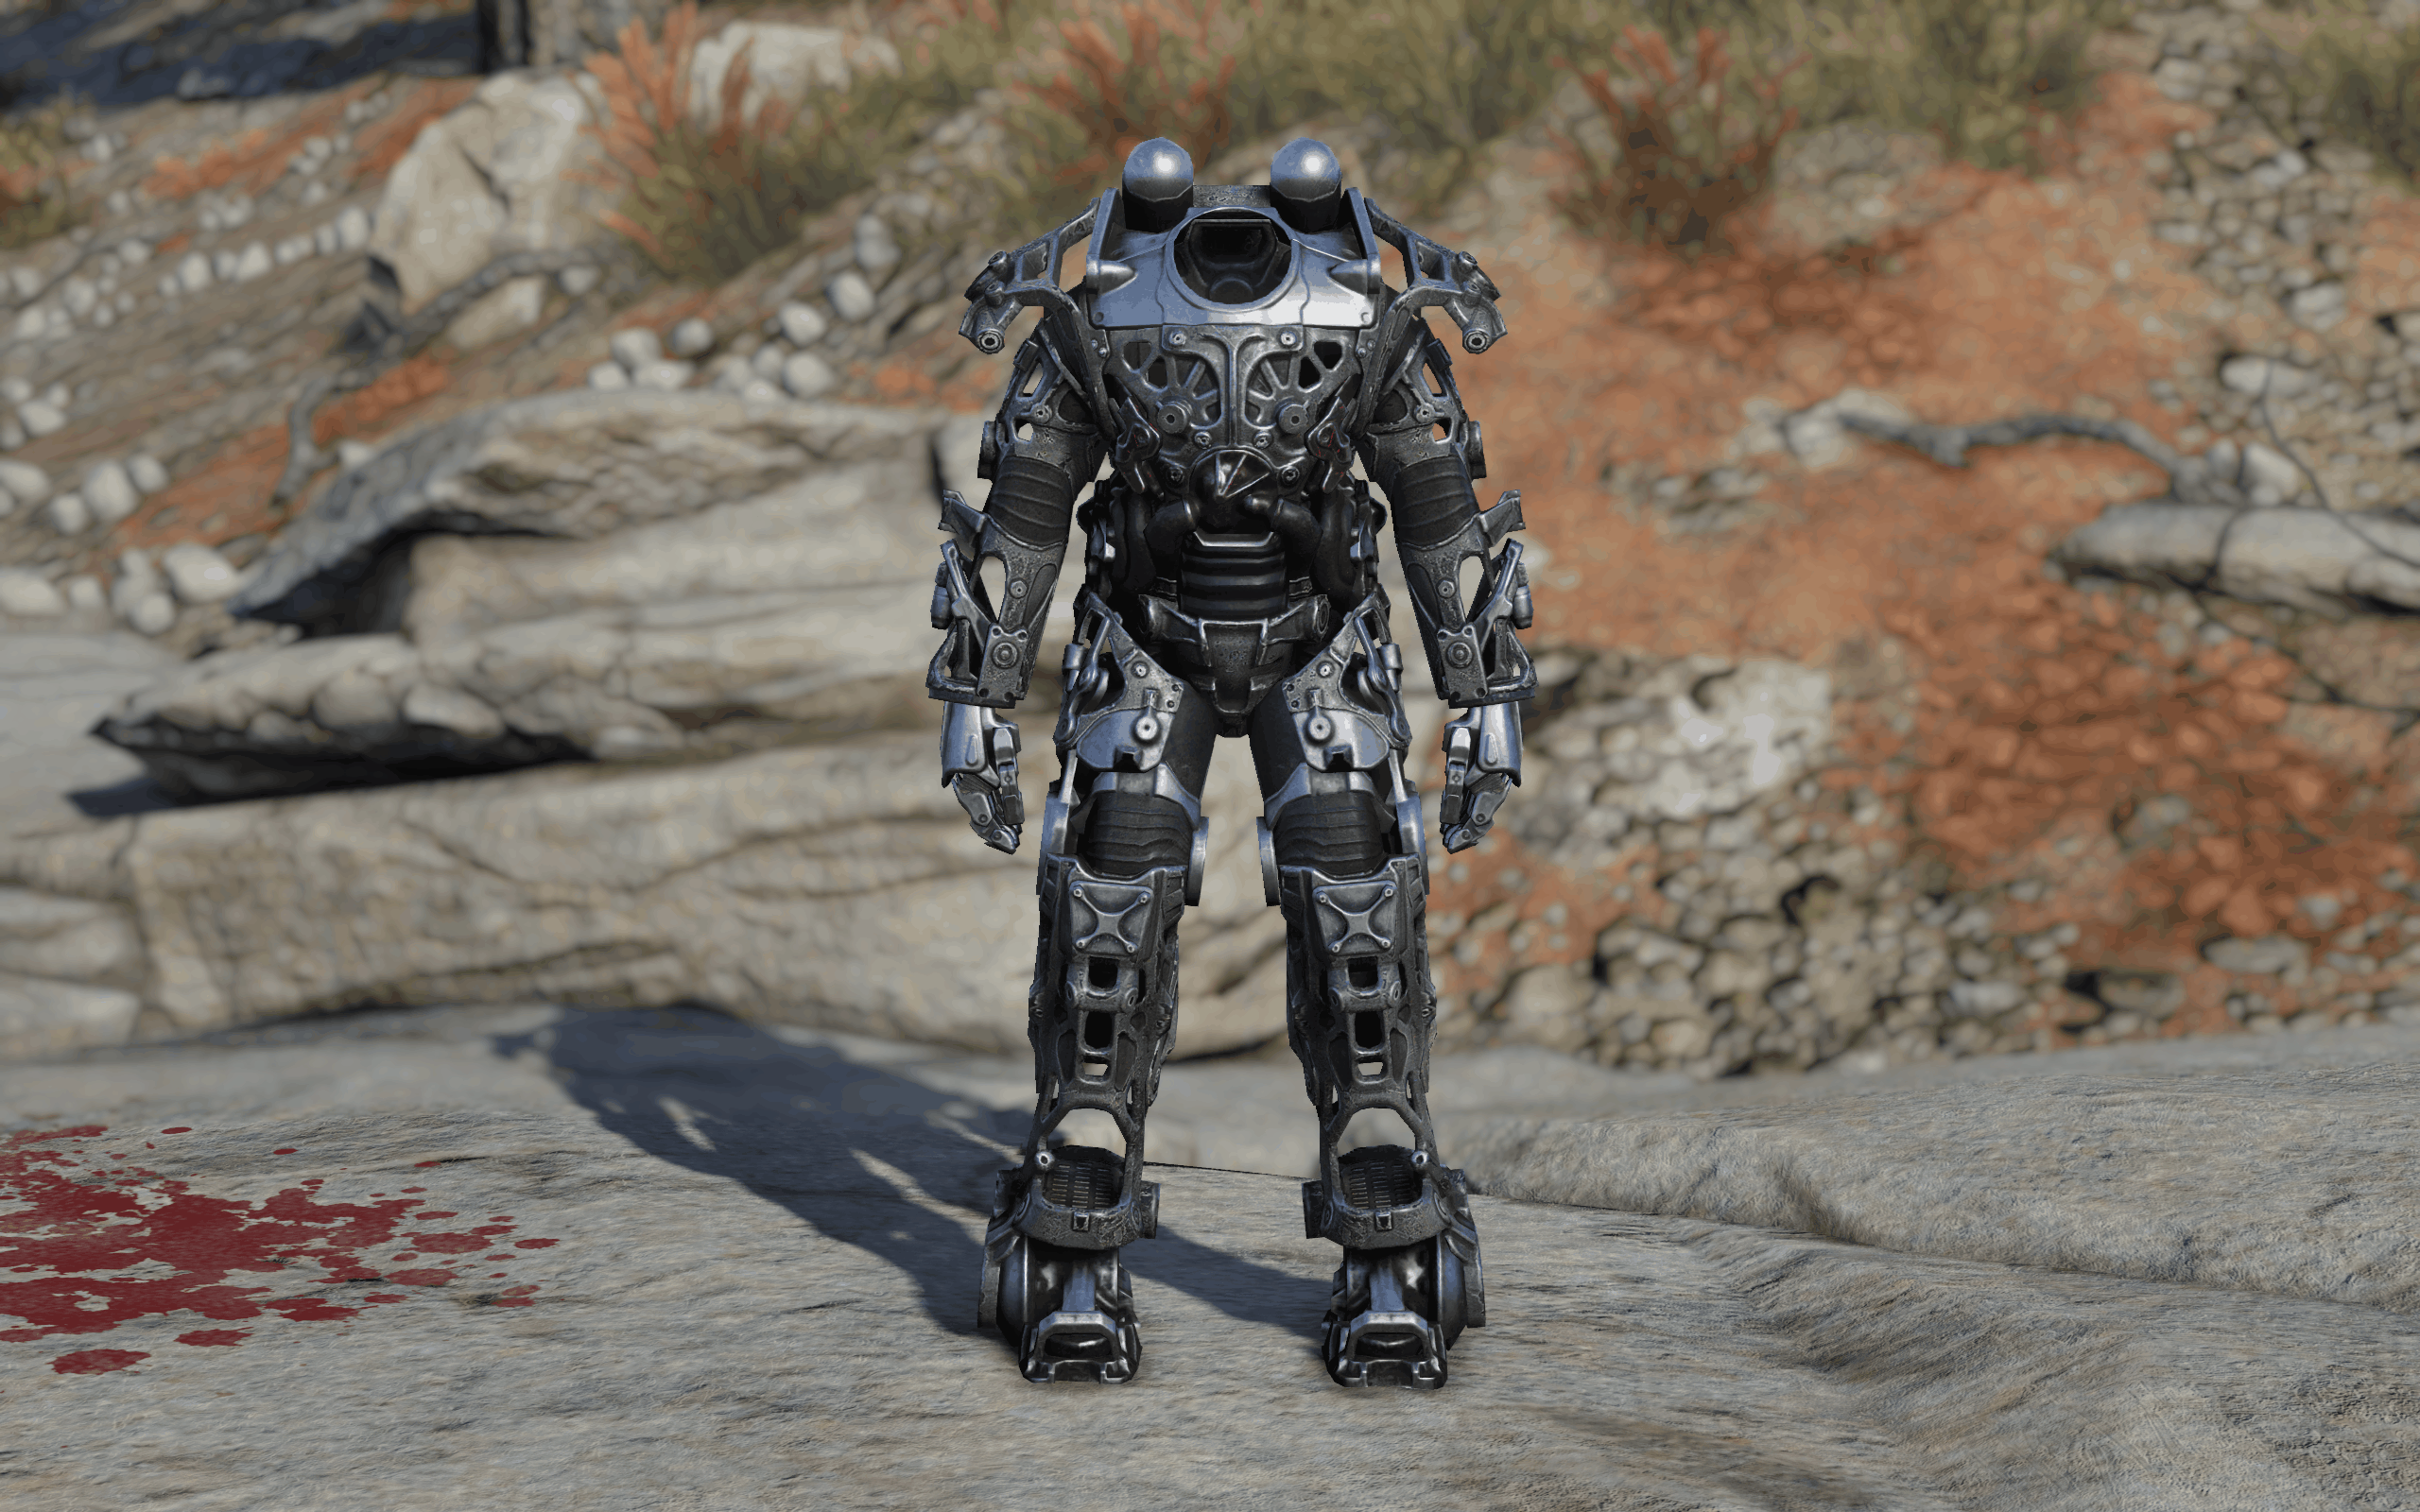 Dark Power Armor Frame And Jetpack 4k Fallout 76 Mod Download